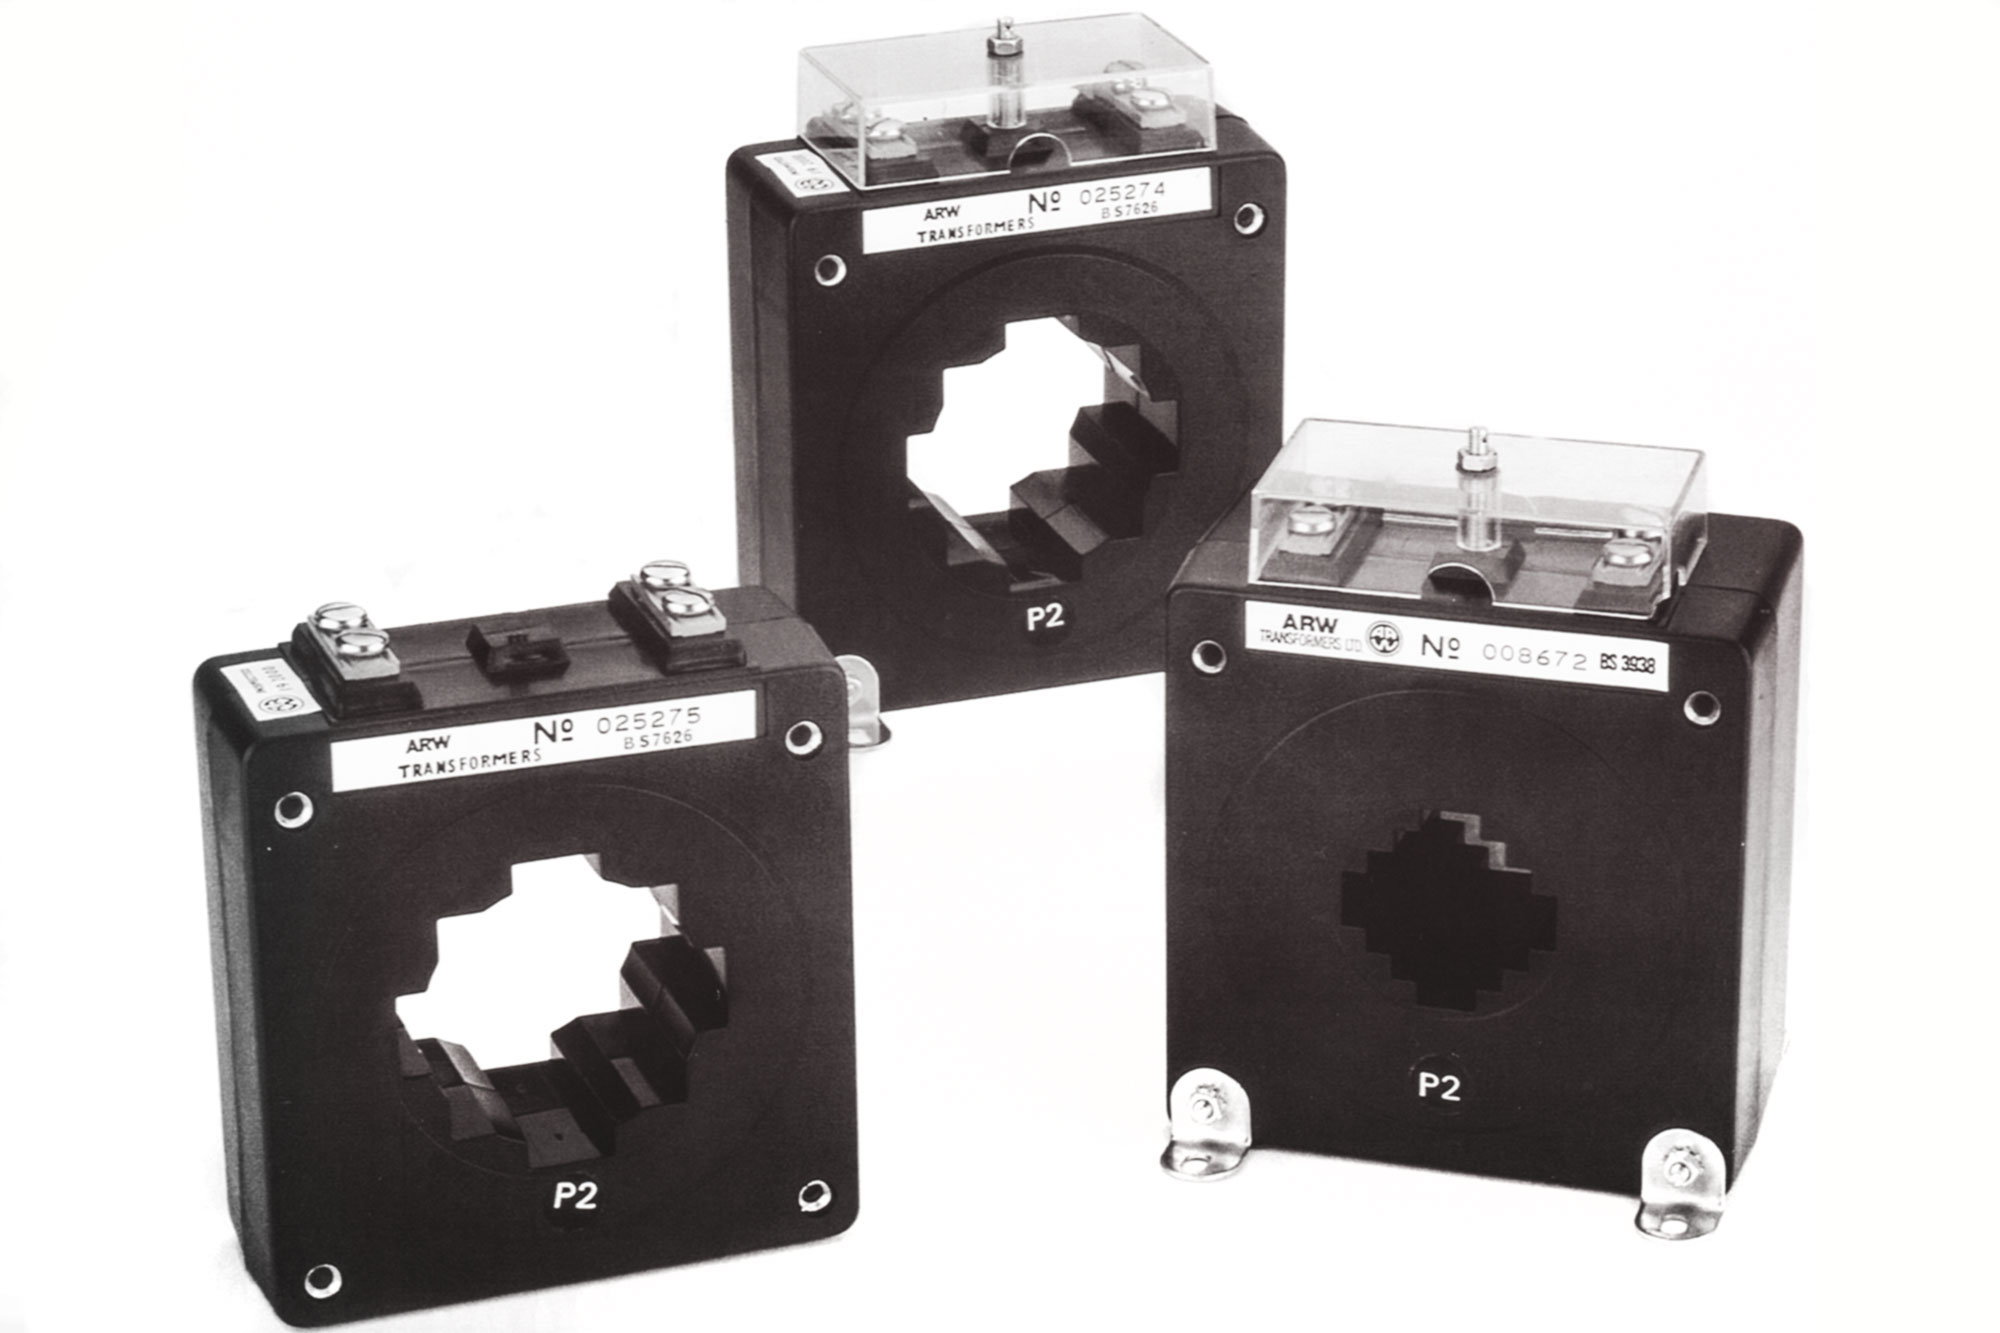 Moulded-Case Utility Transformers with 3.6 kV Insulation